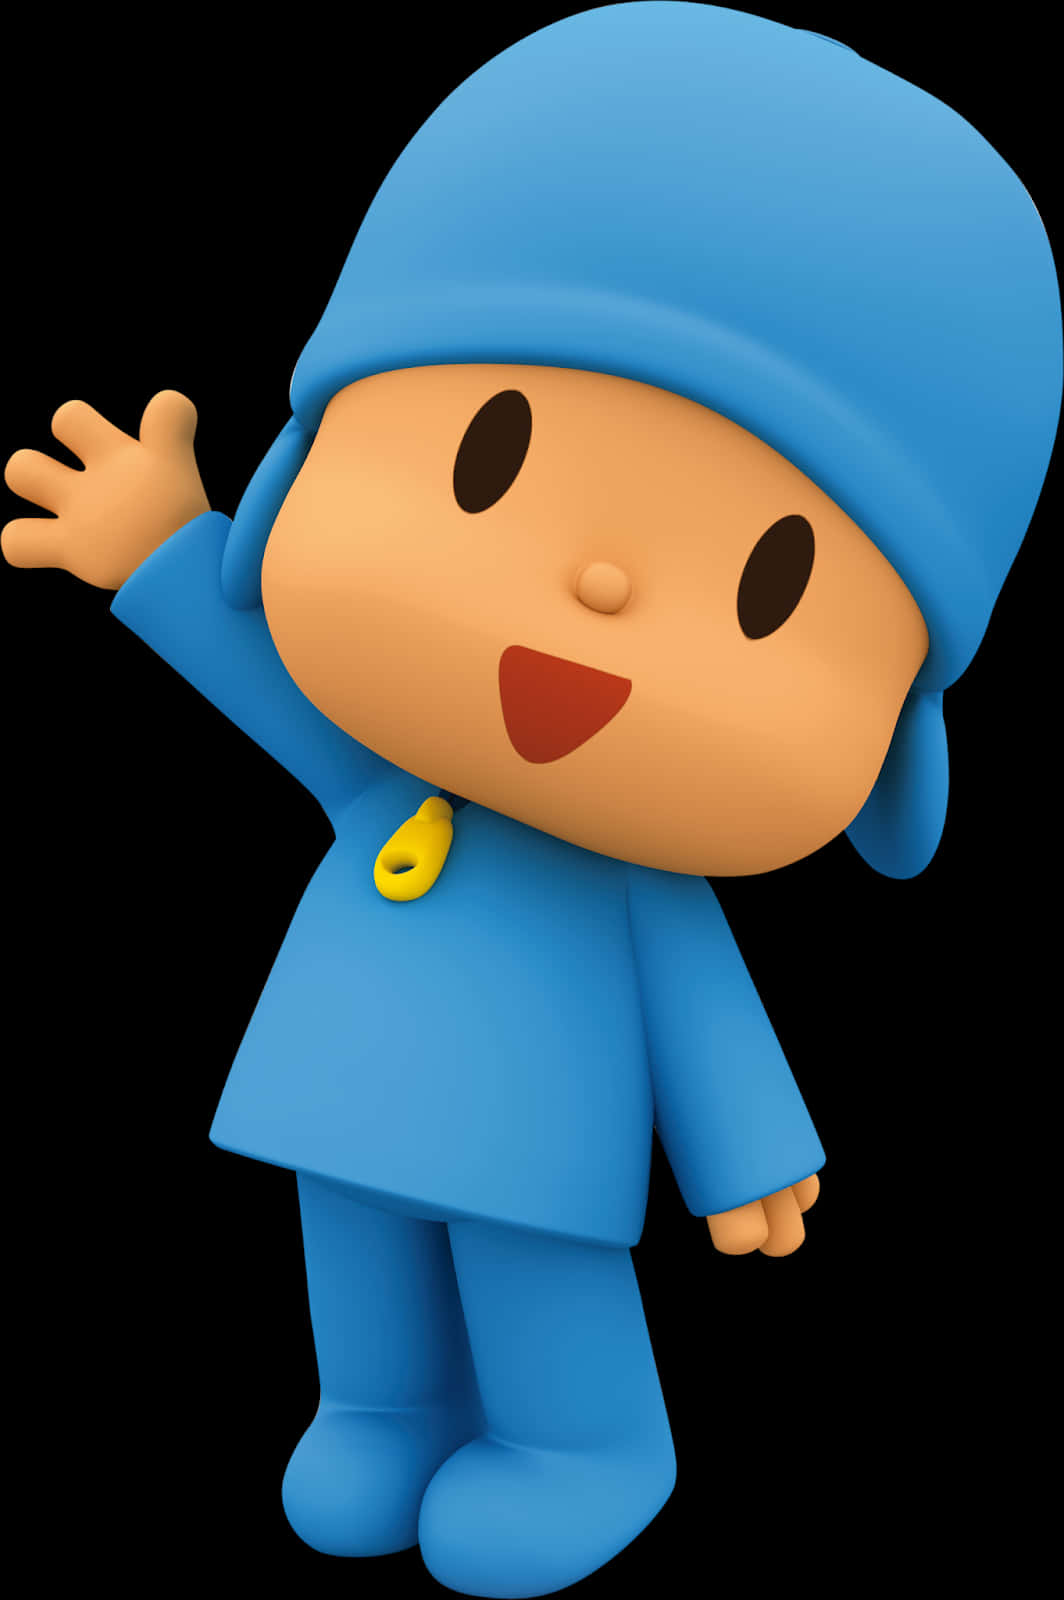 A Cartoon Character With A Blue Hat And Blue Hat